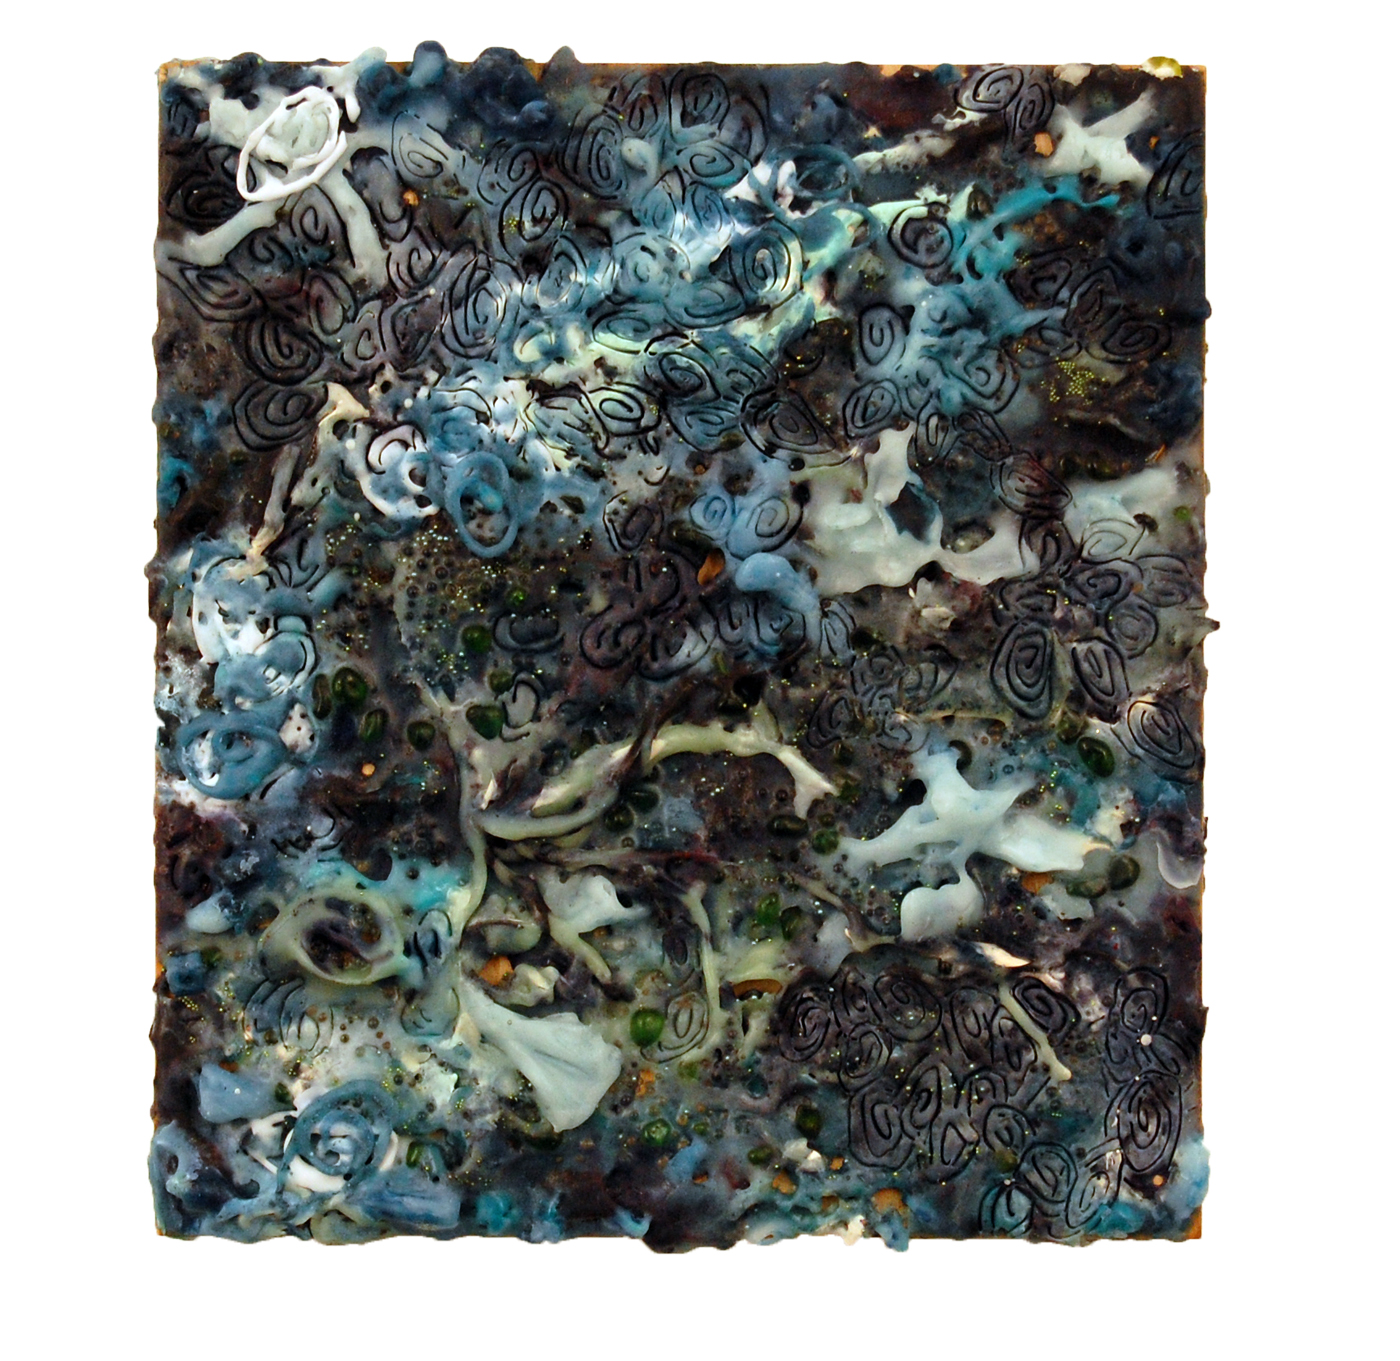 Sea Level, 2012, encaustic and glass beads on panel, 8 x 9 inches